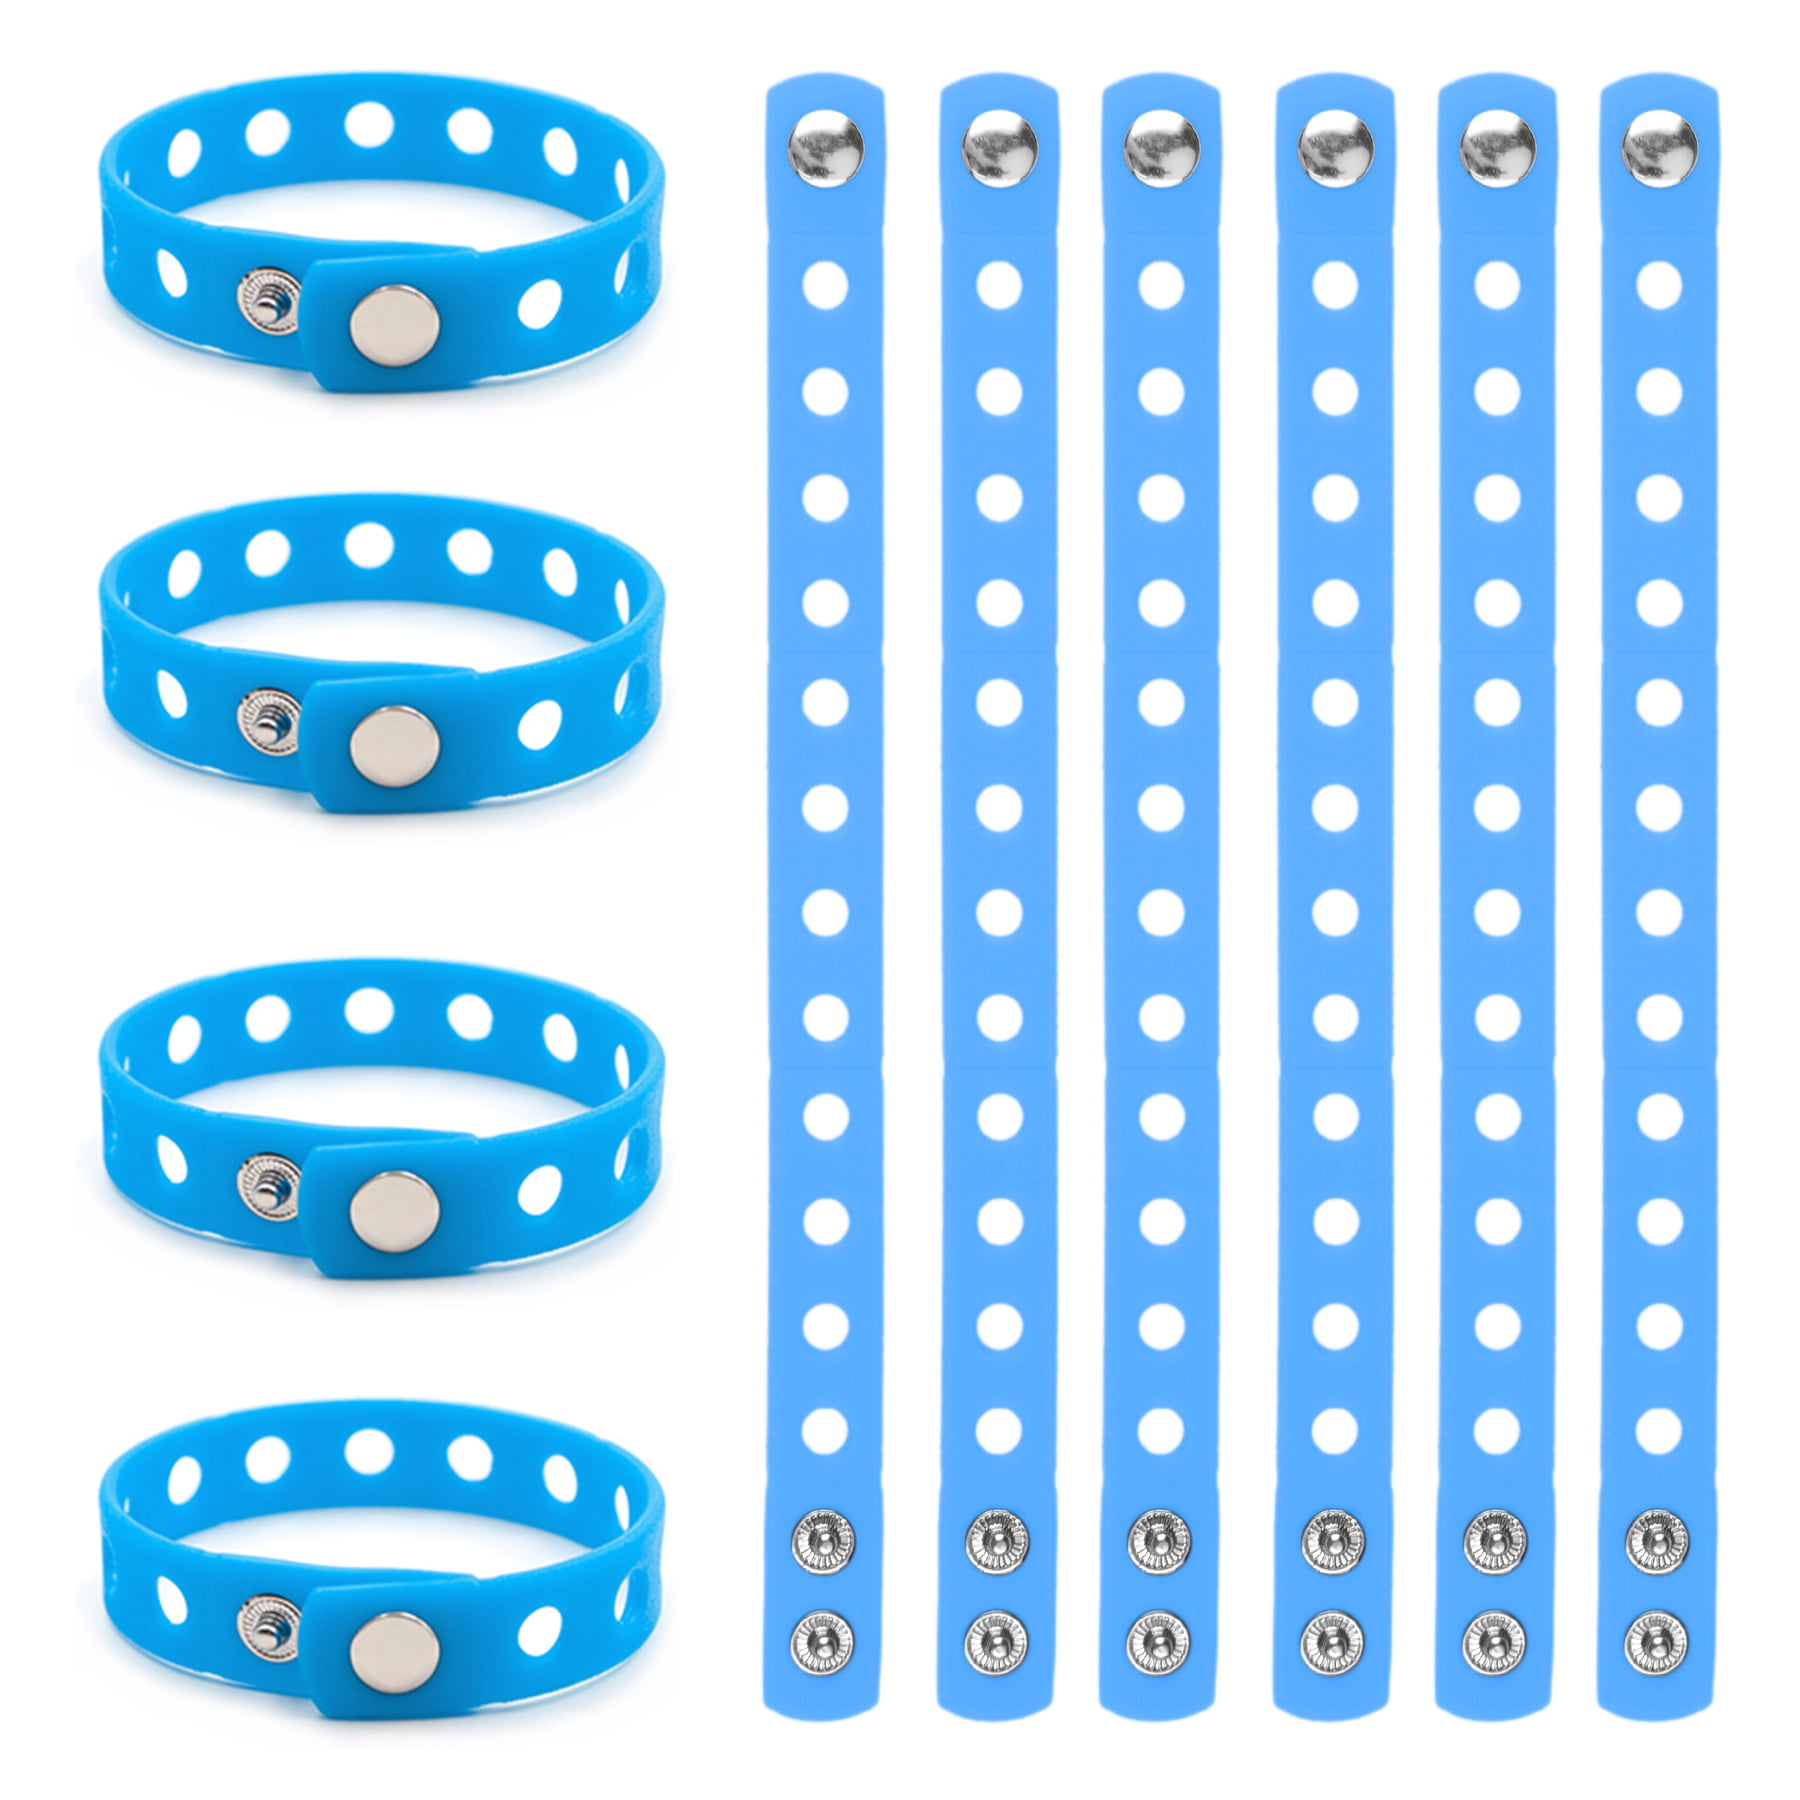 Shoe Decoration,by Augernis Class Activities Award 15Pcs Silicone Bracelet Wristbands and 8Pcs Shoe Charms for Kids Birthday Party Presents 